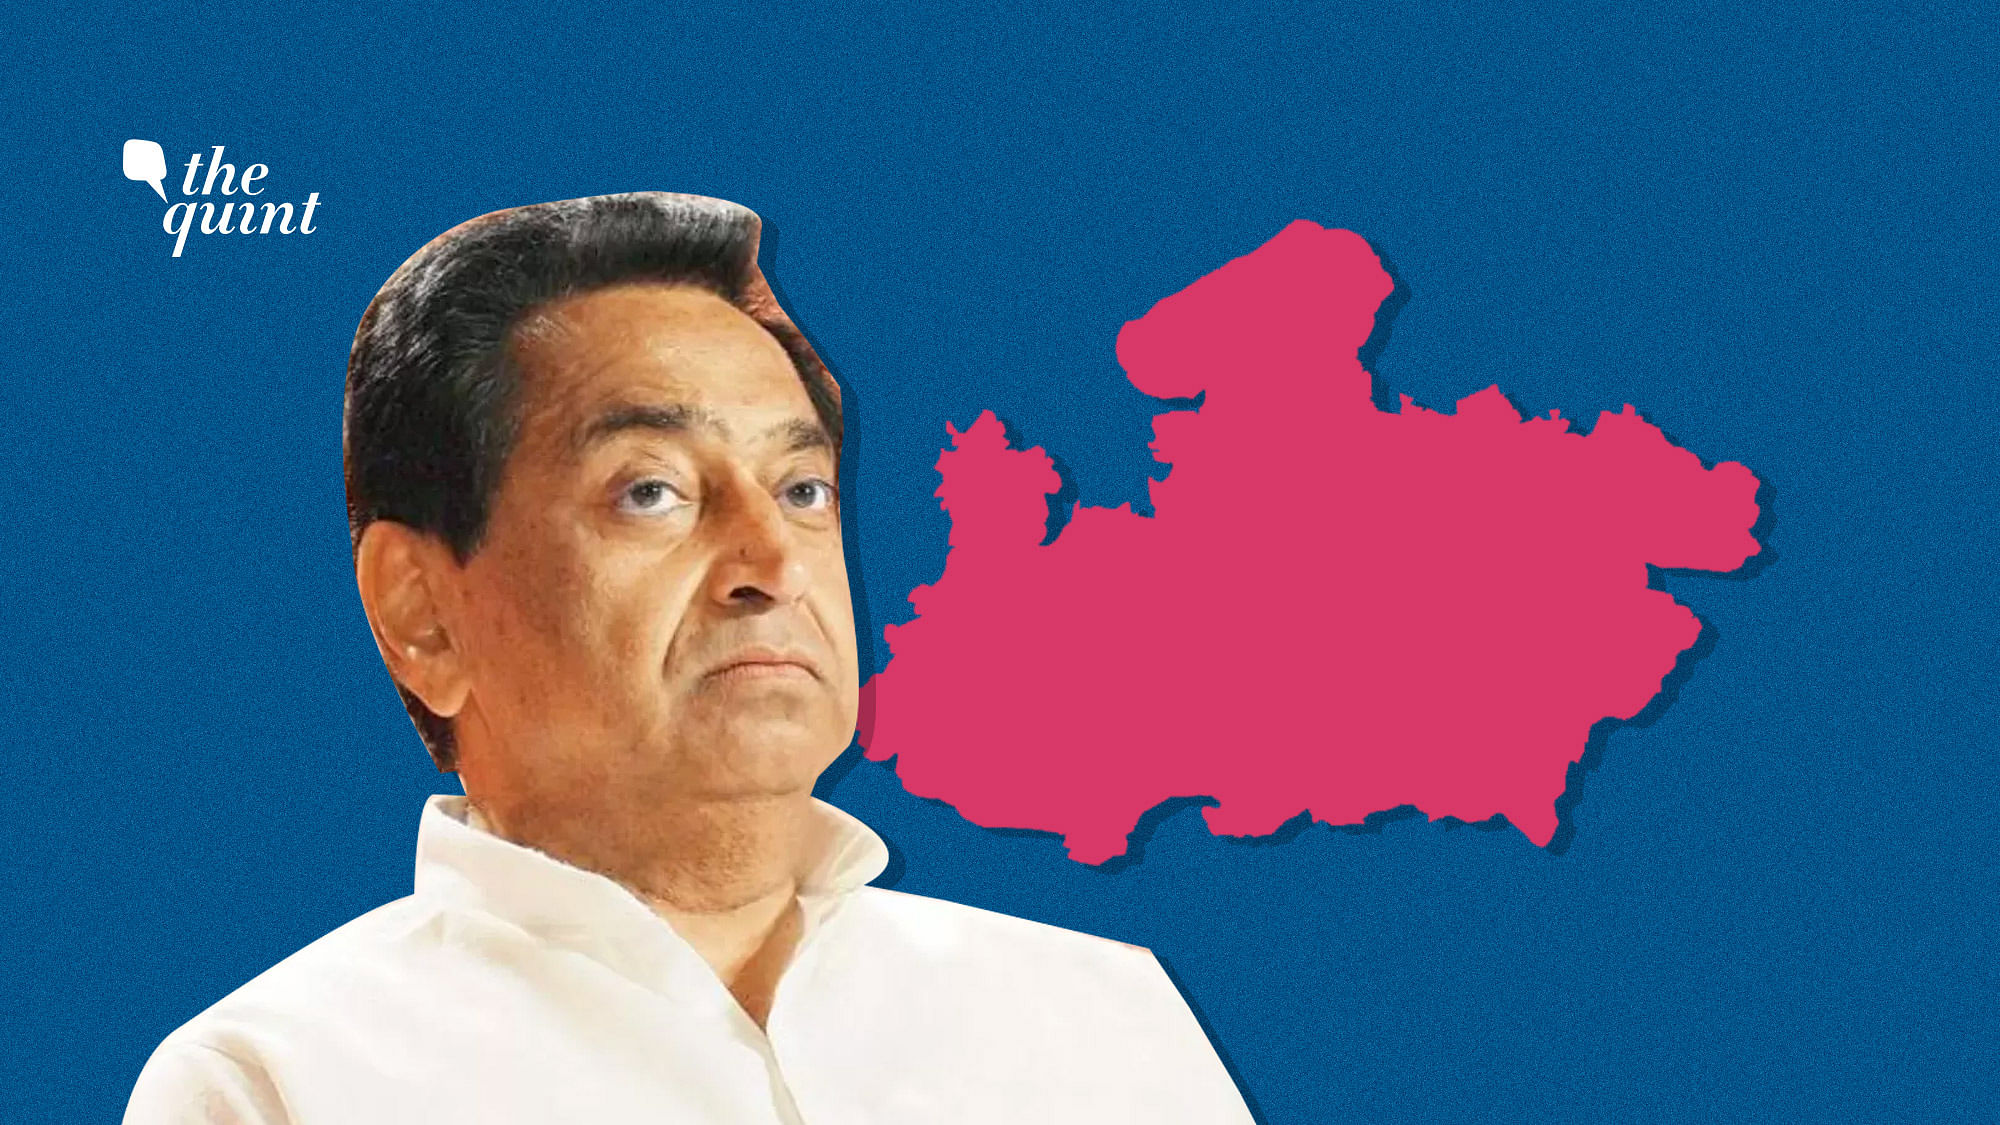 Image of MP chief minister, Kamal Nath, used for representational purposes.